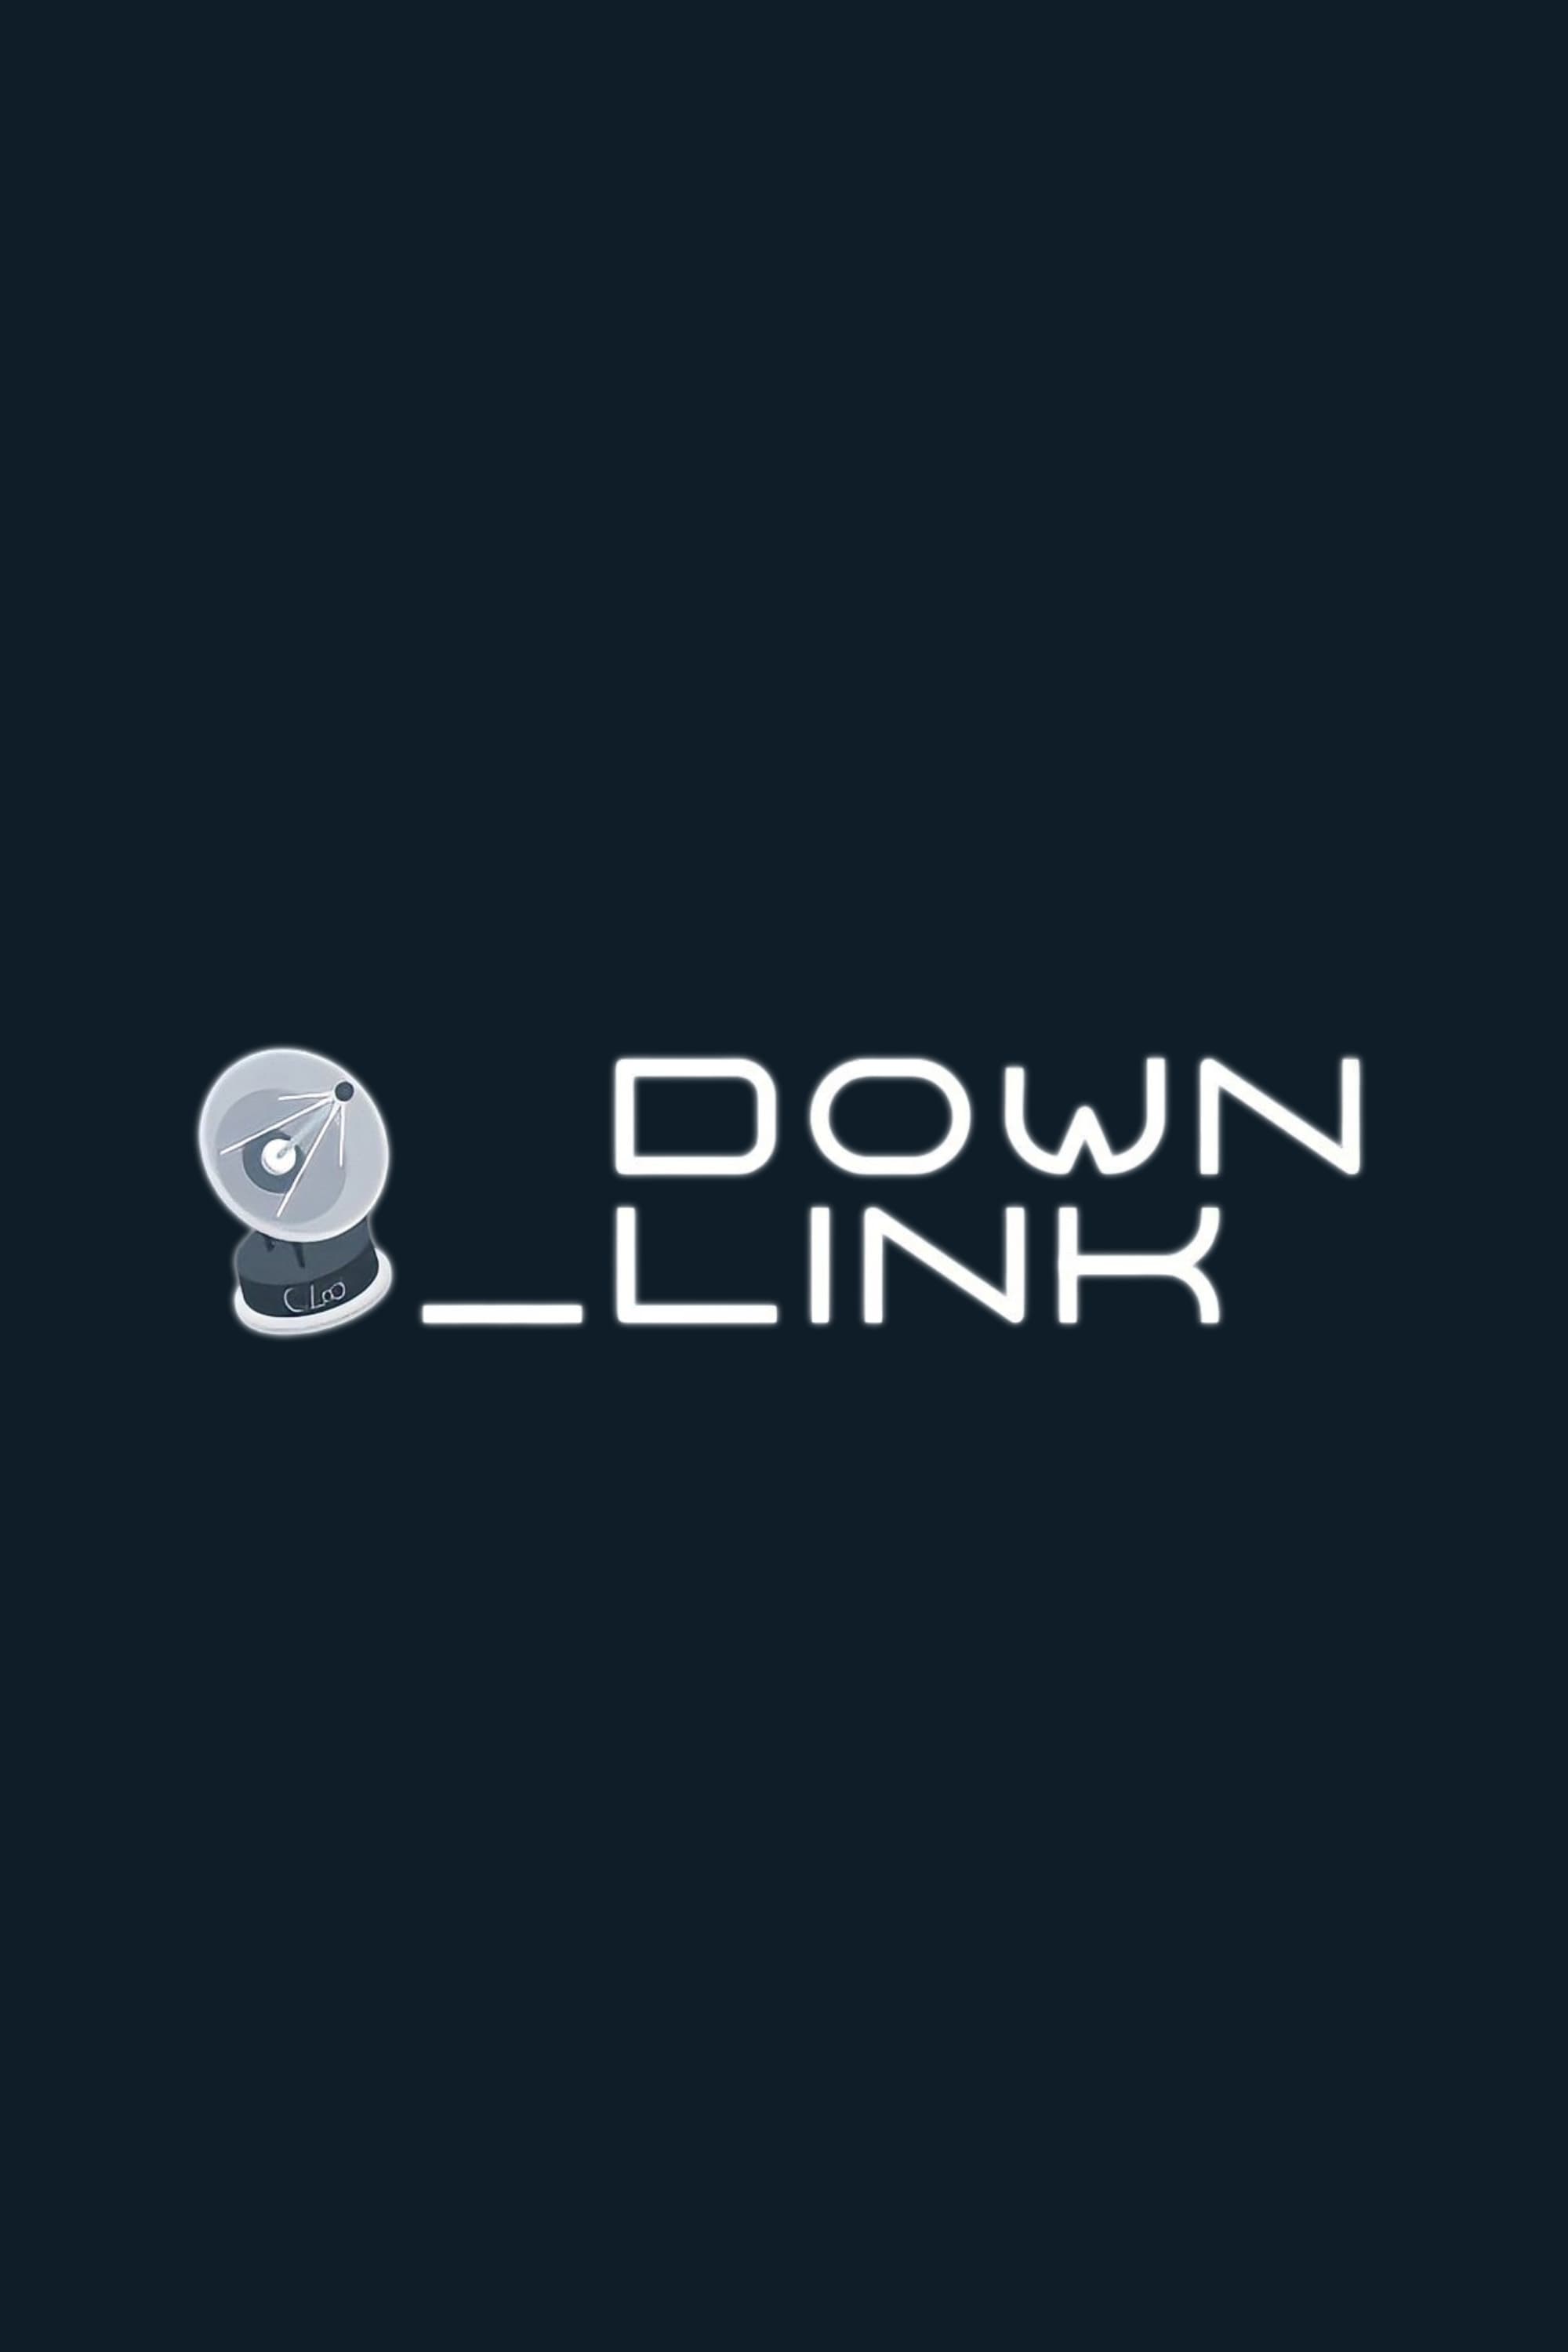 Down_Link